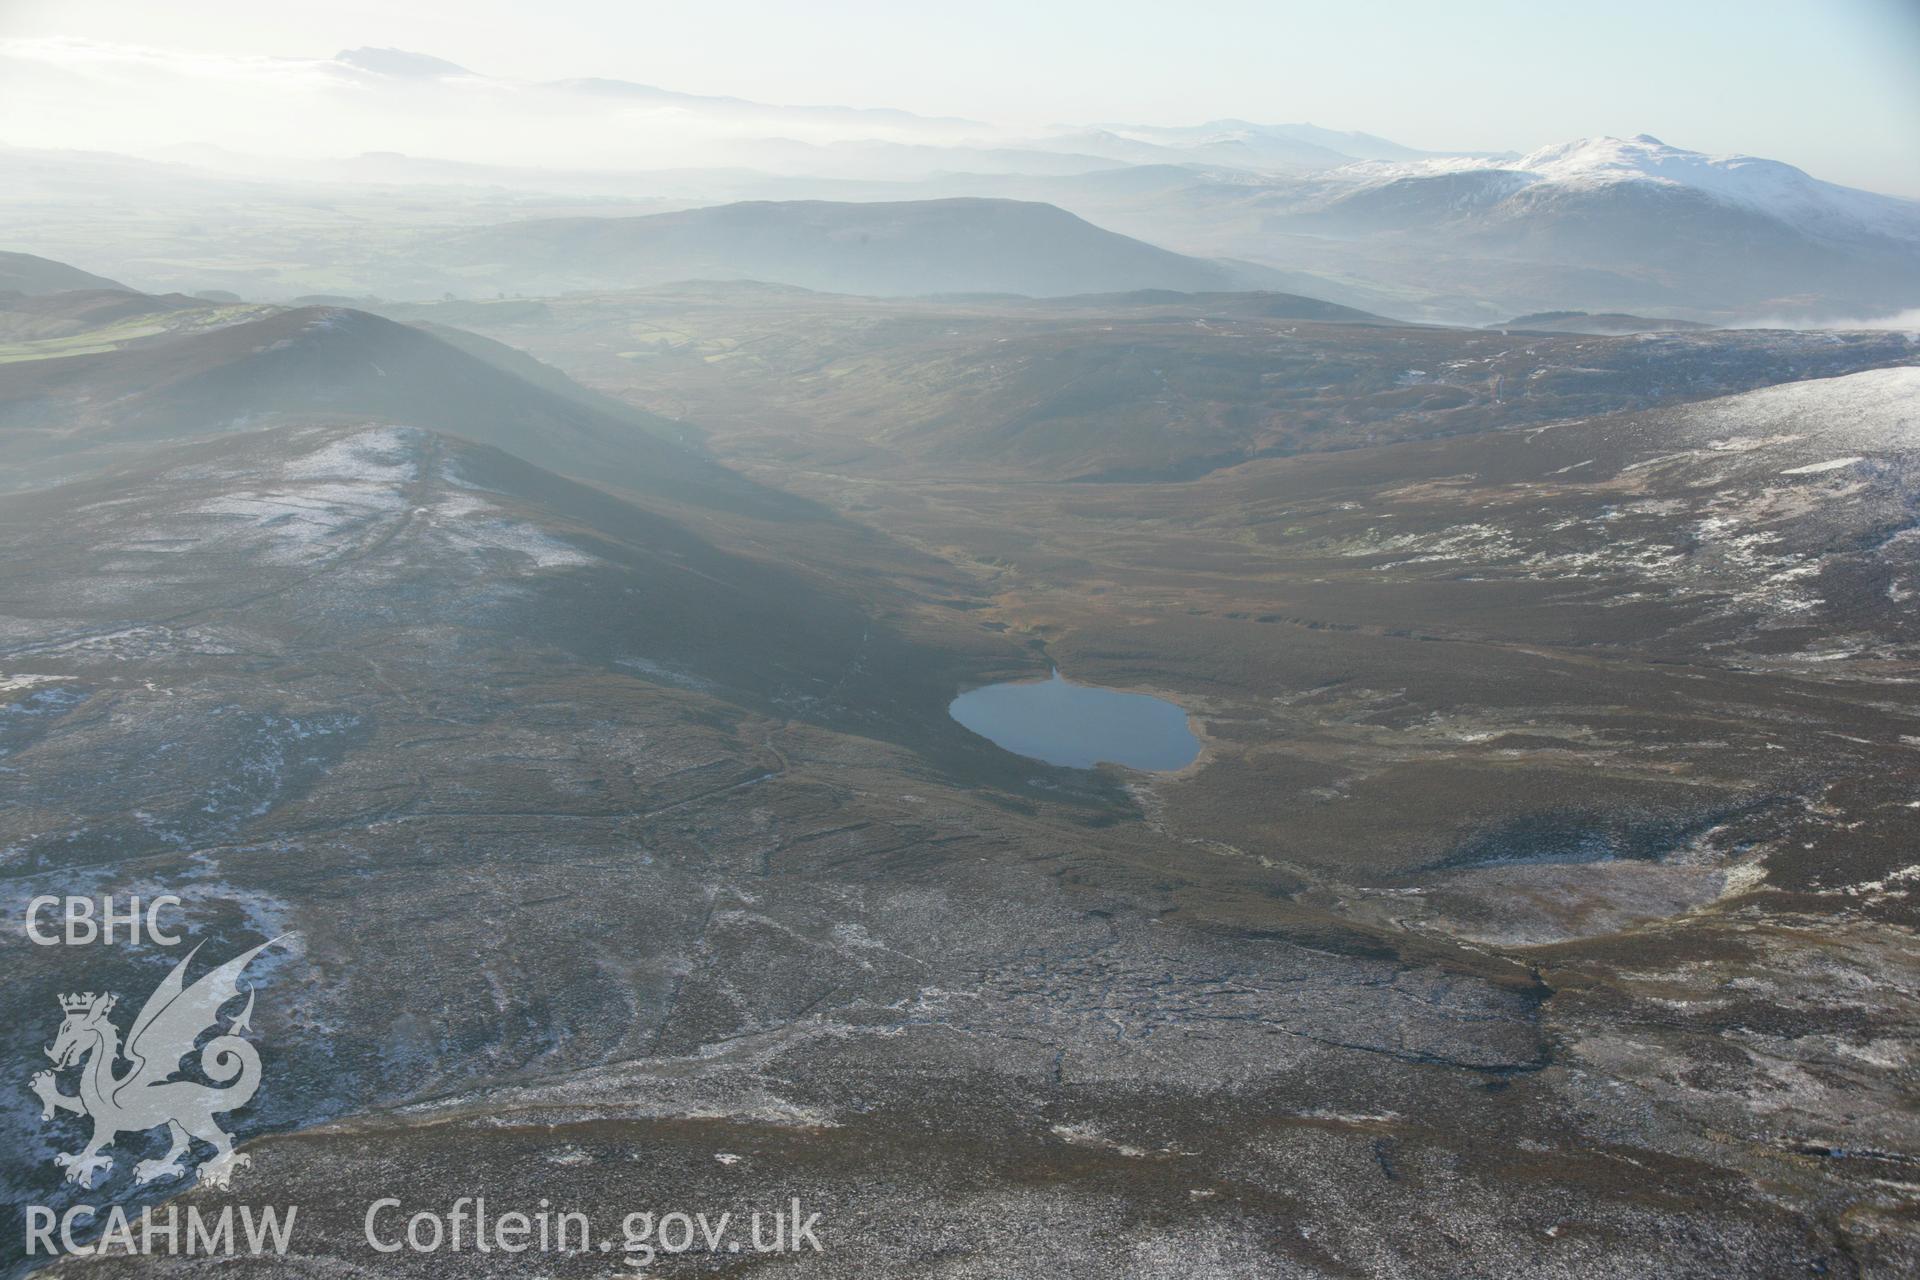 RCAHMW colour oblique aerial photograph of Carnedd-y-Filiast and landscape view of Llyn Hesgyn. Taken on 25 January 2007 by Toby Driver